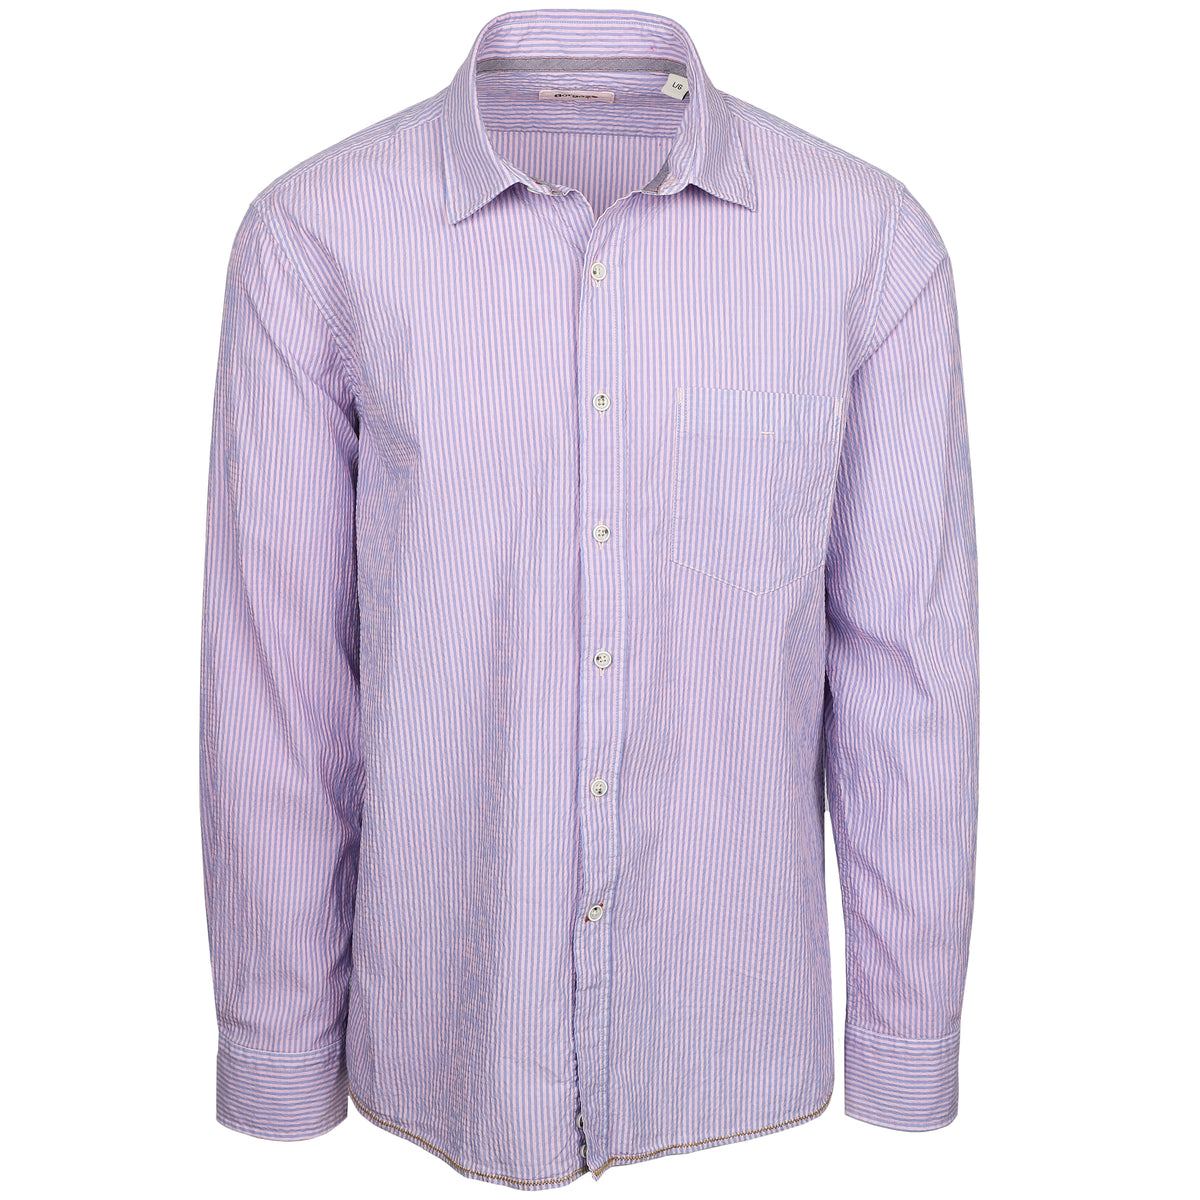 Look oh-so-cool and stay feeling hot with this Maratea PInk Seersucker Garment Dyed Long Sleeve Shirt. Crafted from lightweight seersucker fabric that&#39;s craft fully dyed for a unique look, you&#39;ll be ready for warm weather, whatever the season. Pucker up for a style that&#39;ll have onlookers in awe.